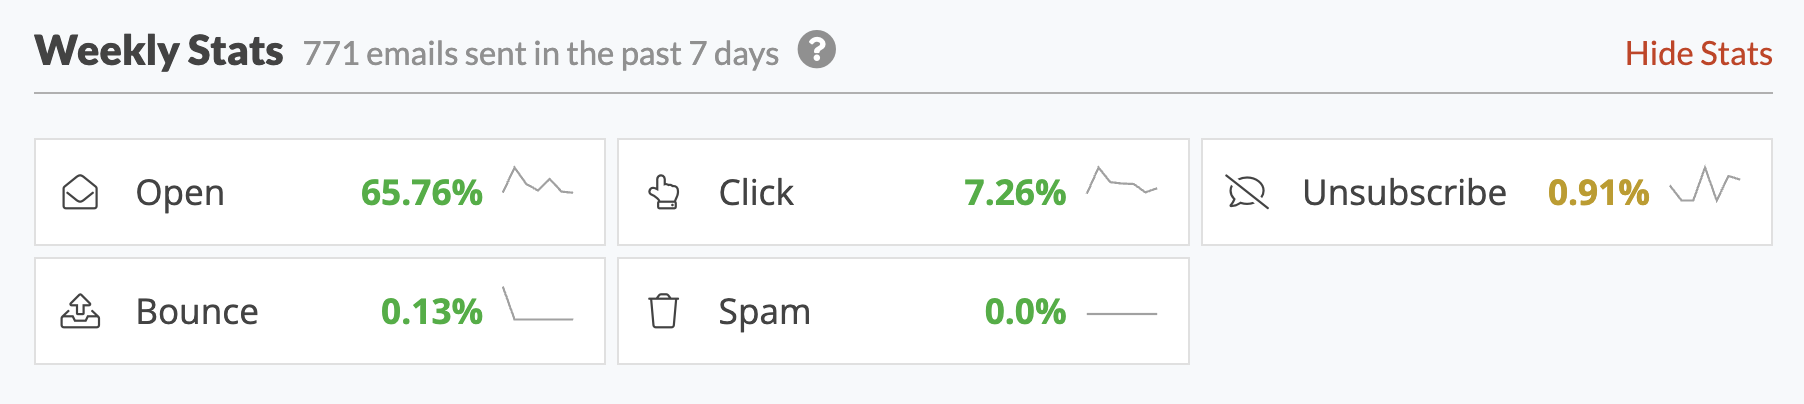 A screenshot of the deliverability dashboard showing weekly stats from 771 emails sent in the past 7 days. The 'open' stat reads 65.76% and appears in green, the 'click' stat reads 7.26% and appears in green, the 'unsubscribe' stat reads 0.91% and appears in yellow, the 'bounce' stat reads 0.13% and appears in green, and the 'spam' stat reads 0.0% and appears in green.